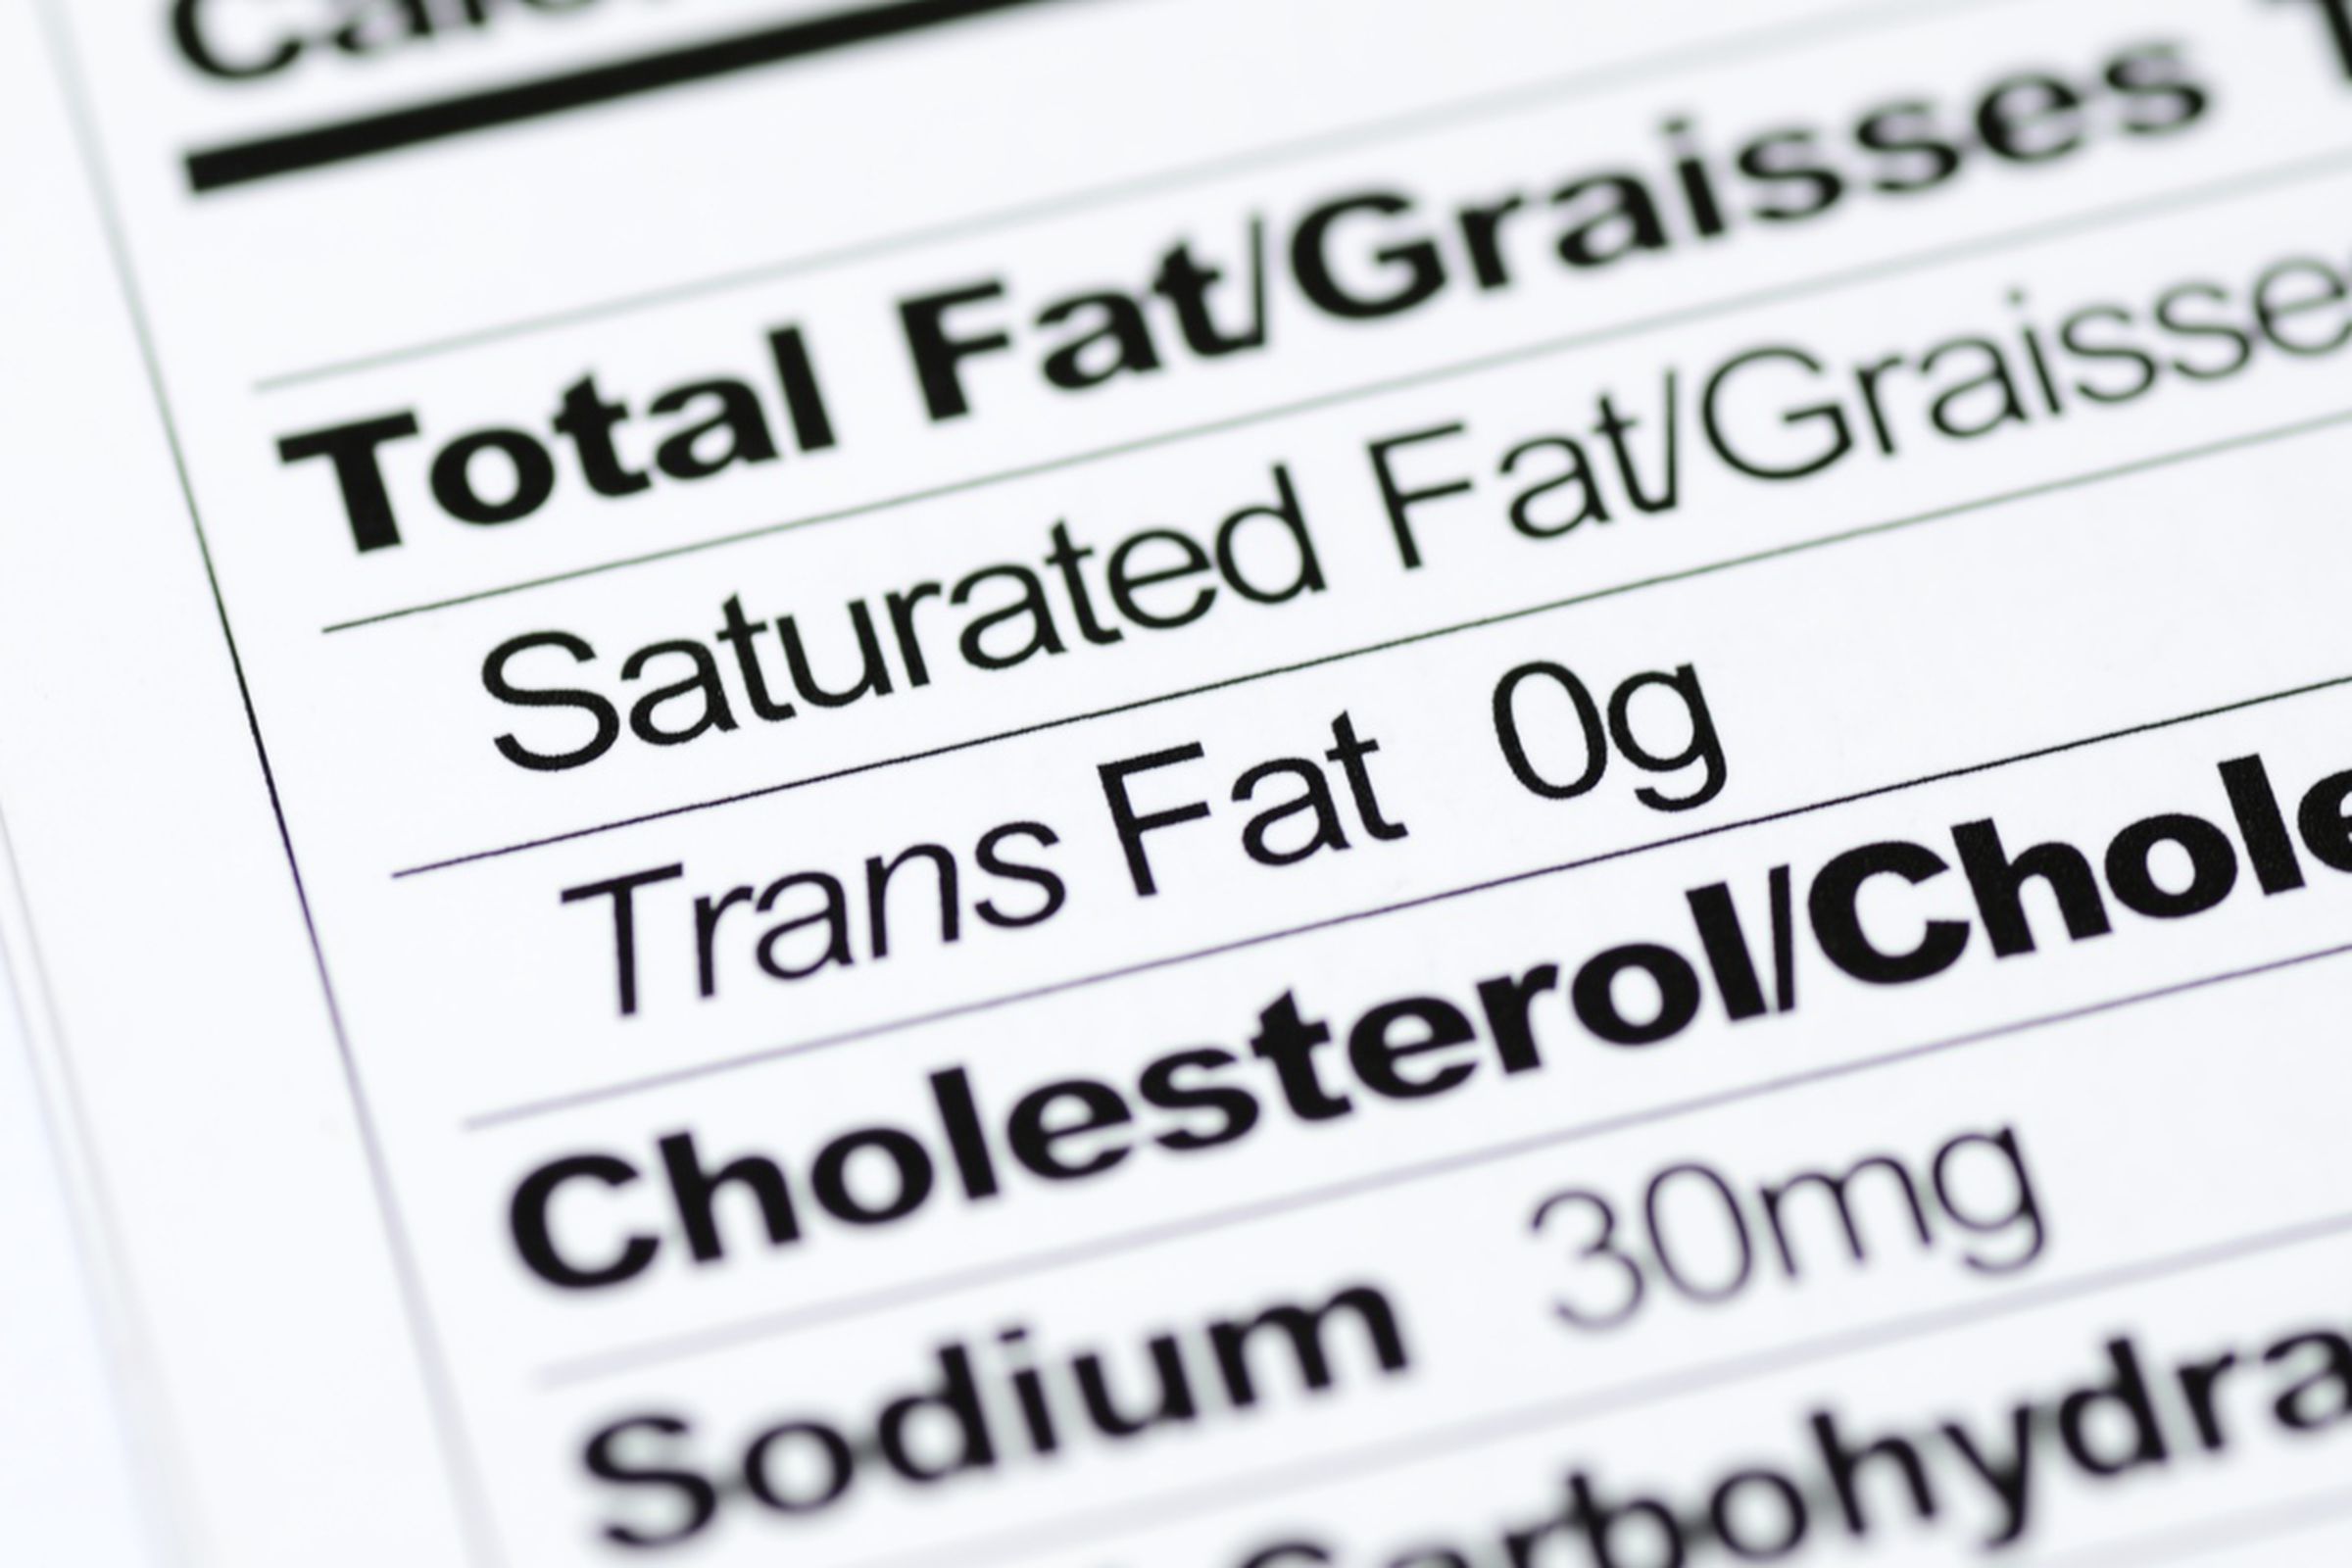 Trans Fats Shutterstock http://www.shutterstock.com/pic-124122148/stock-photo-nutrition-label-focused-on-trans-fat-content-concept-healthy-eating.html